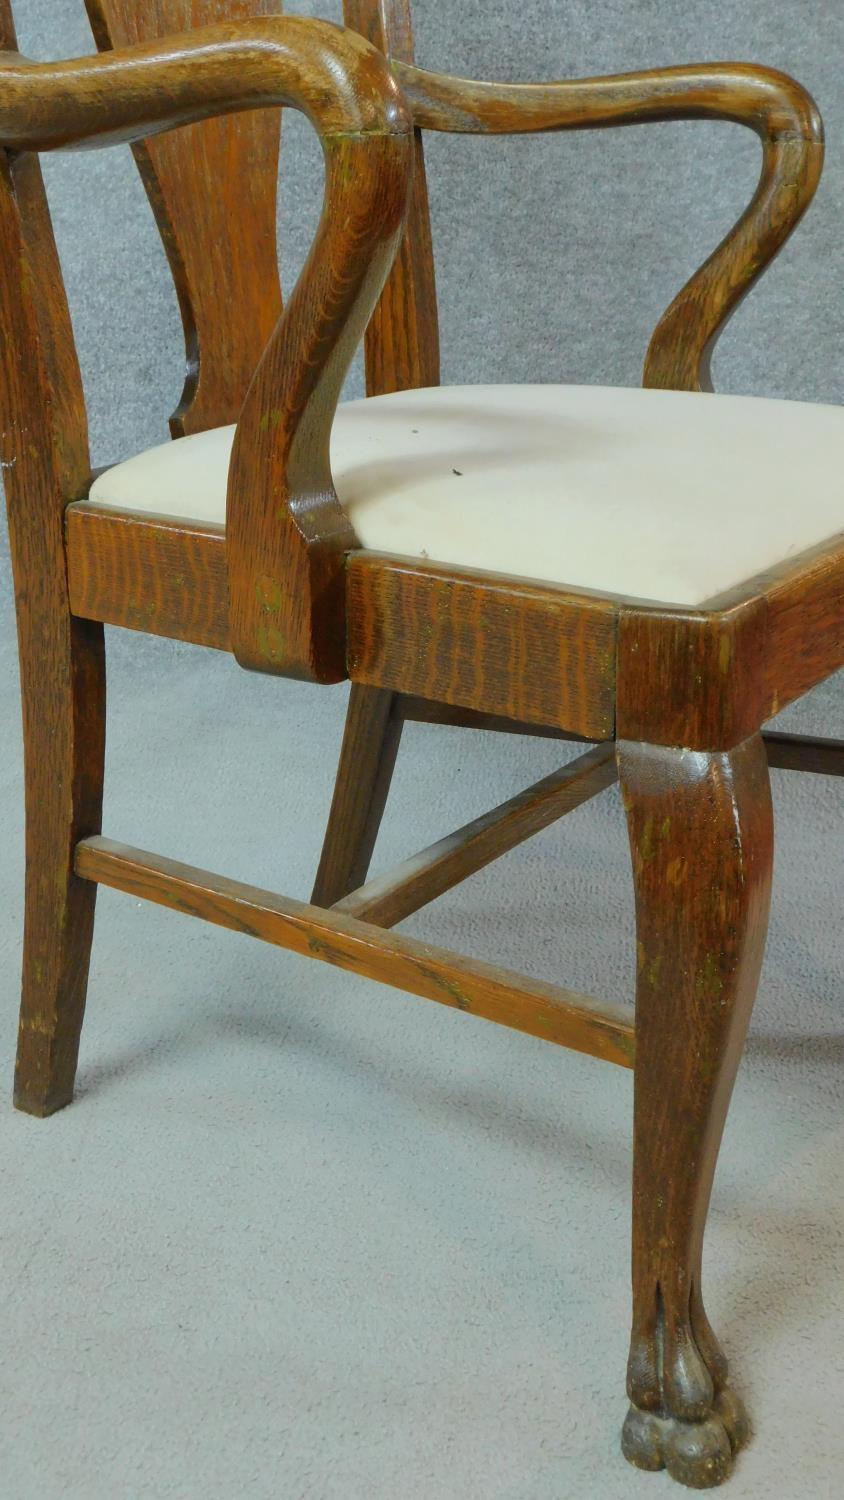 A late 19th century oak early Georgian style armchair with vase splat back and drop in seat raised - Image 4 of 4